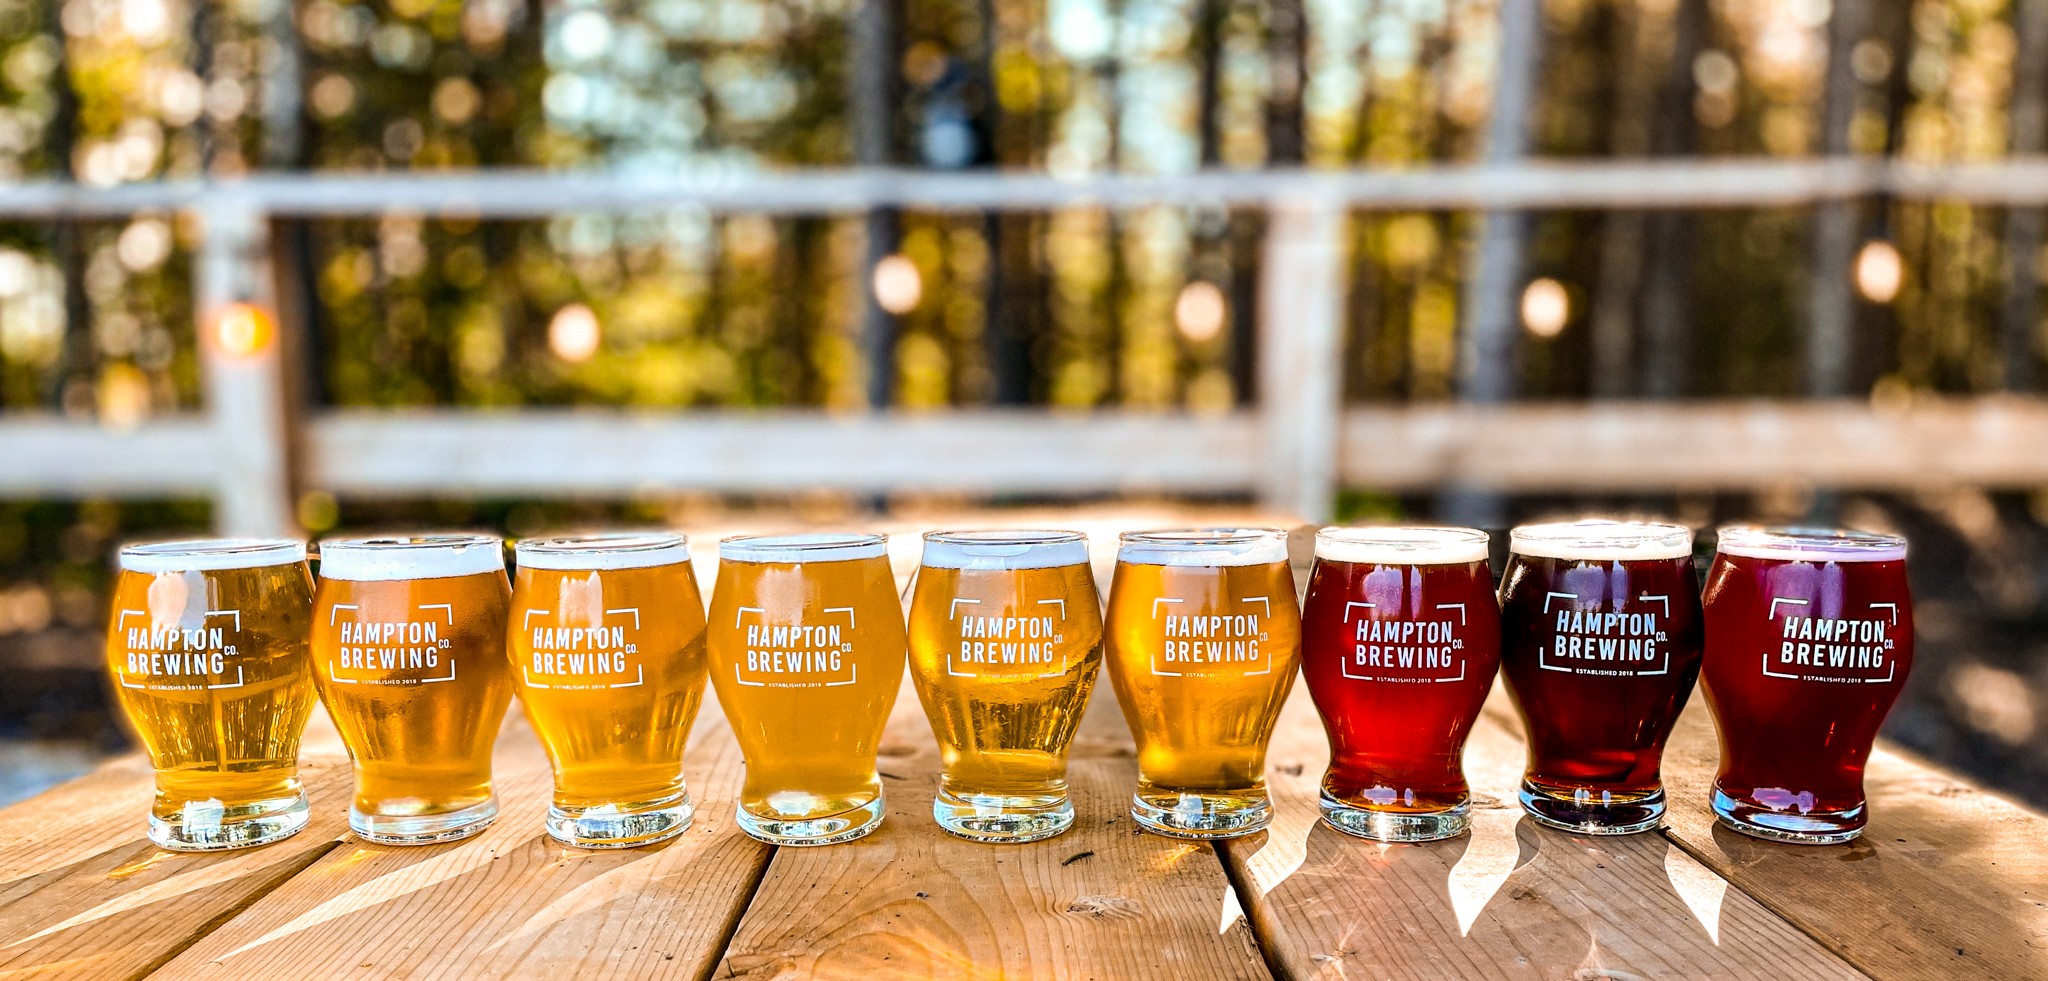 HBC Beers lined-up showing color gradient